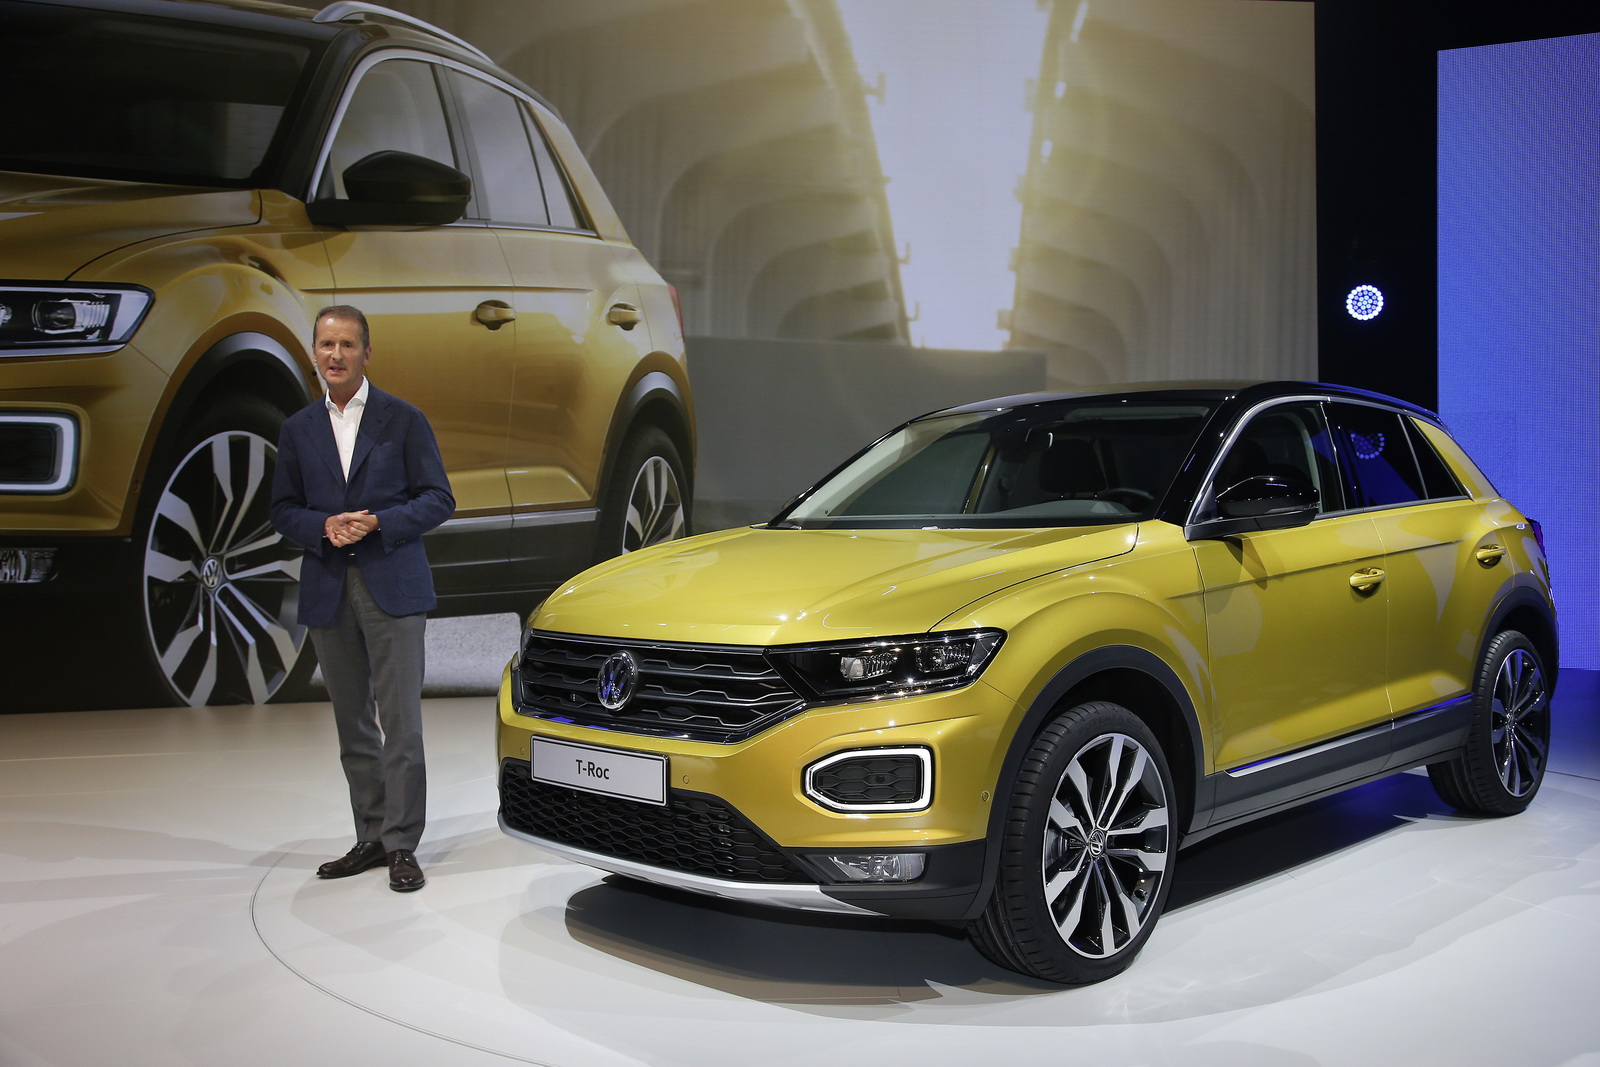 2018 Volkswagen T-Roc Goes On Sale, Pricing Starts At €20,390 In Germany